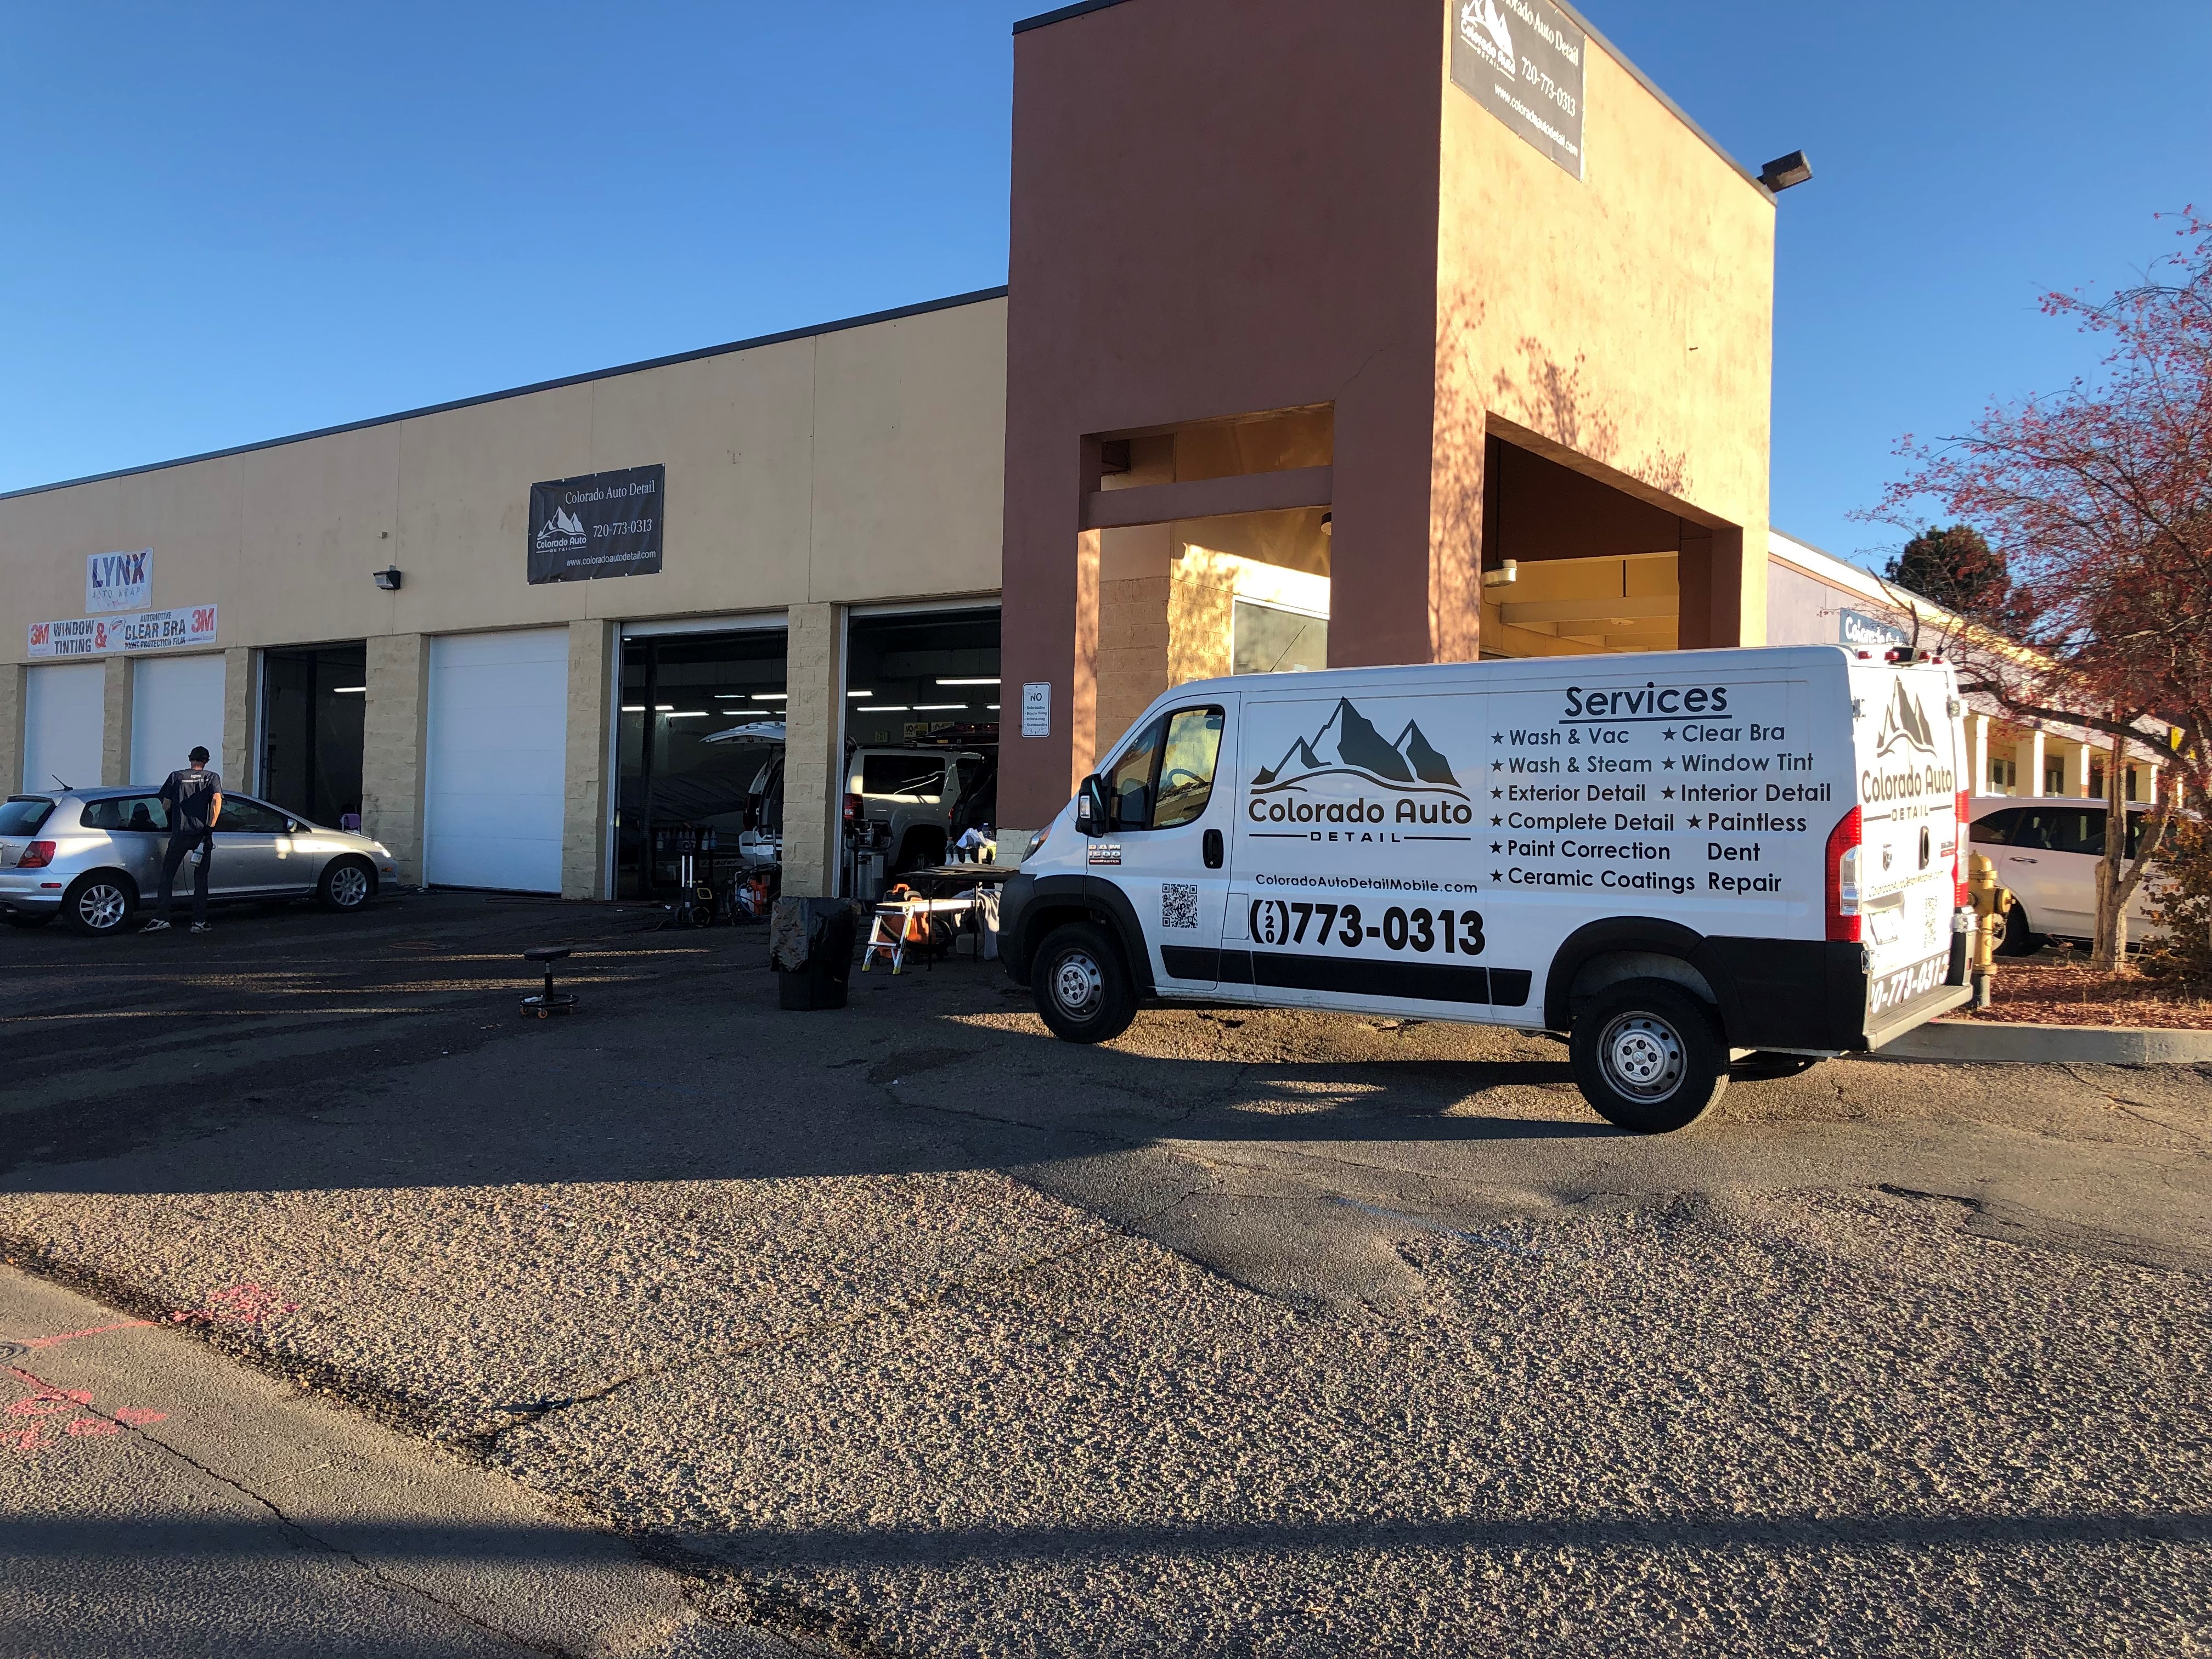 3 Best Auto Detailing Services in Colorado Springs, CO